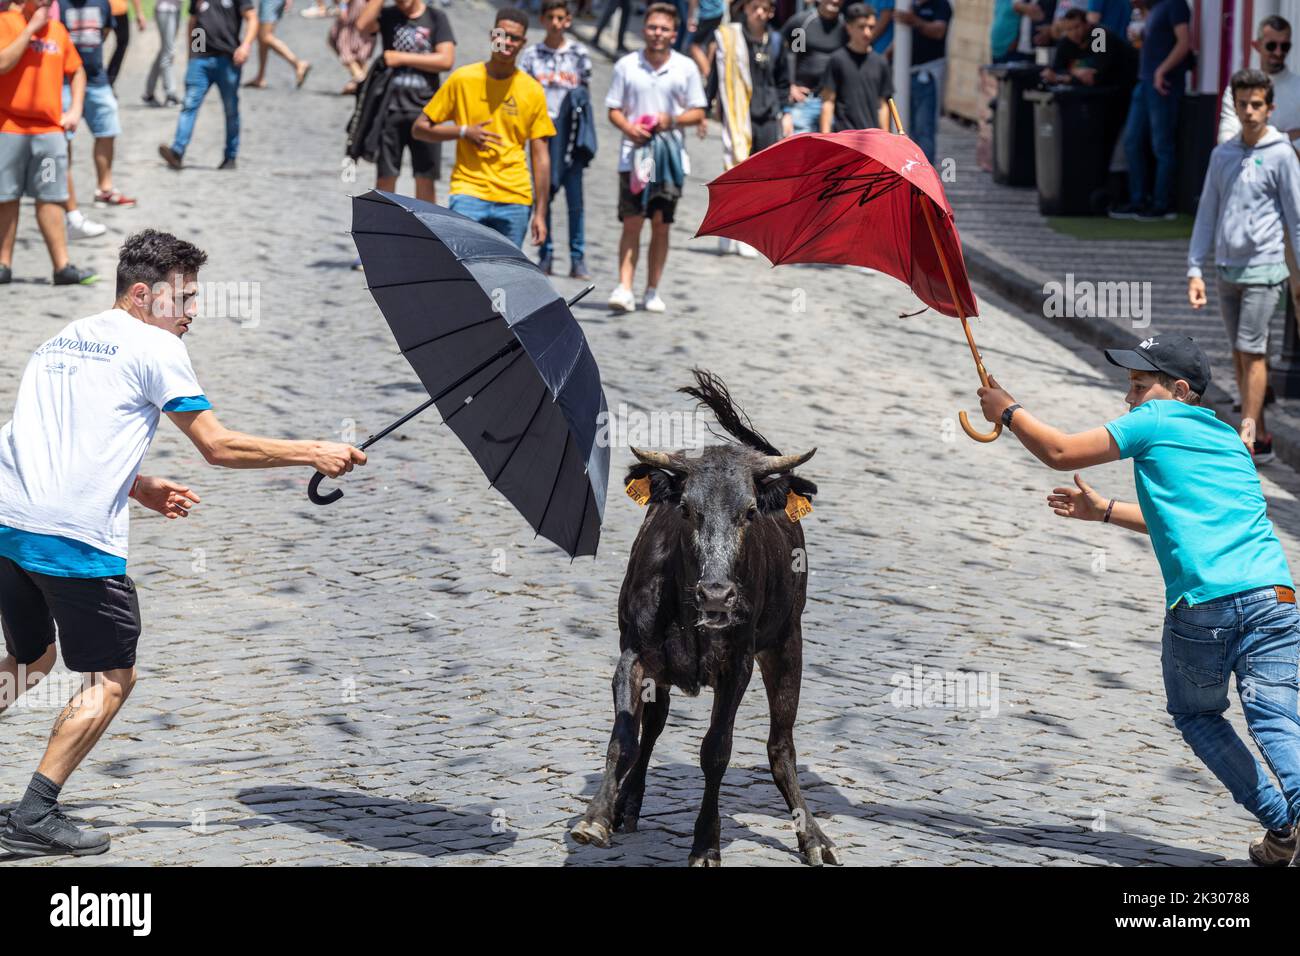 A young bull is frustrated by two capinha or amateur bullfighter during a tourada a corda, also called a bull-on-a-rope at the Sanjoaninas festival on Rue de Sao Joao in Angra do Heroísmo, Terceira Island, Azores, Portugal. During the uniquely Azorean event a bull tied to a long rope runs loose as participants attempt to distract or run from the bull. Stock Photo